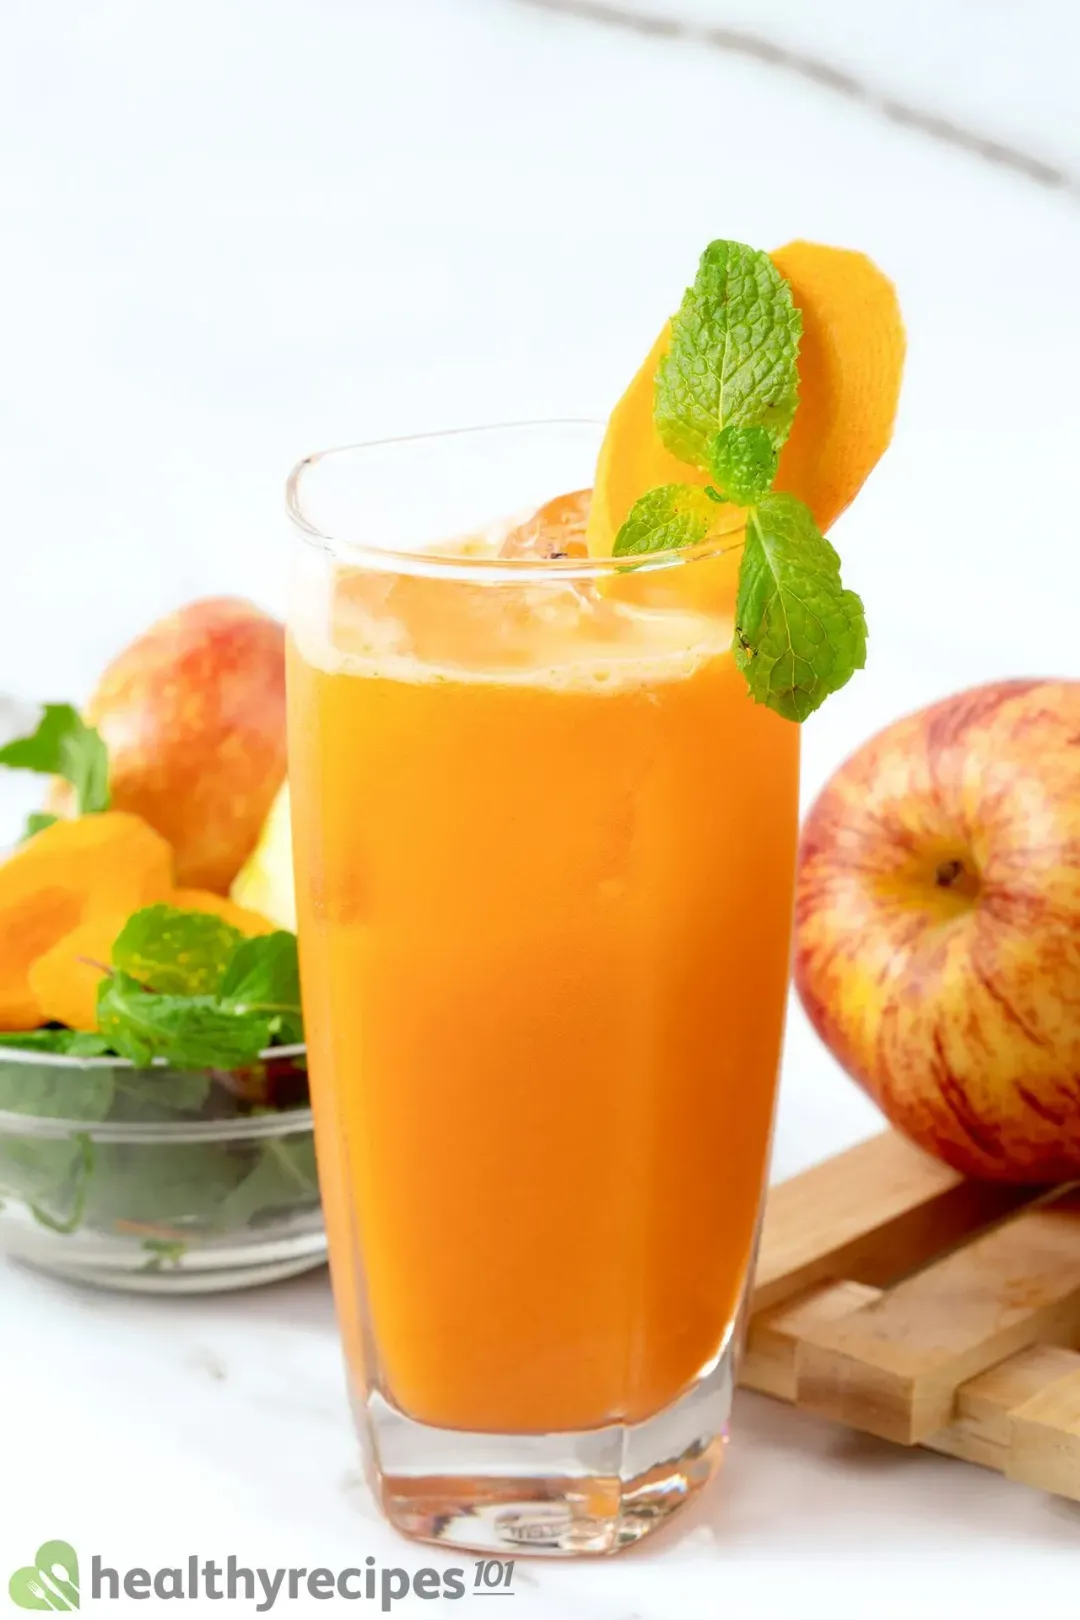 A tall glass of Orange drink with ice garnished with mints, carrot slices and whole apples